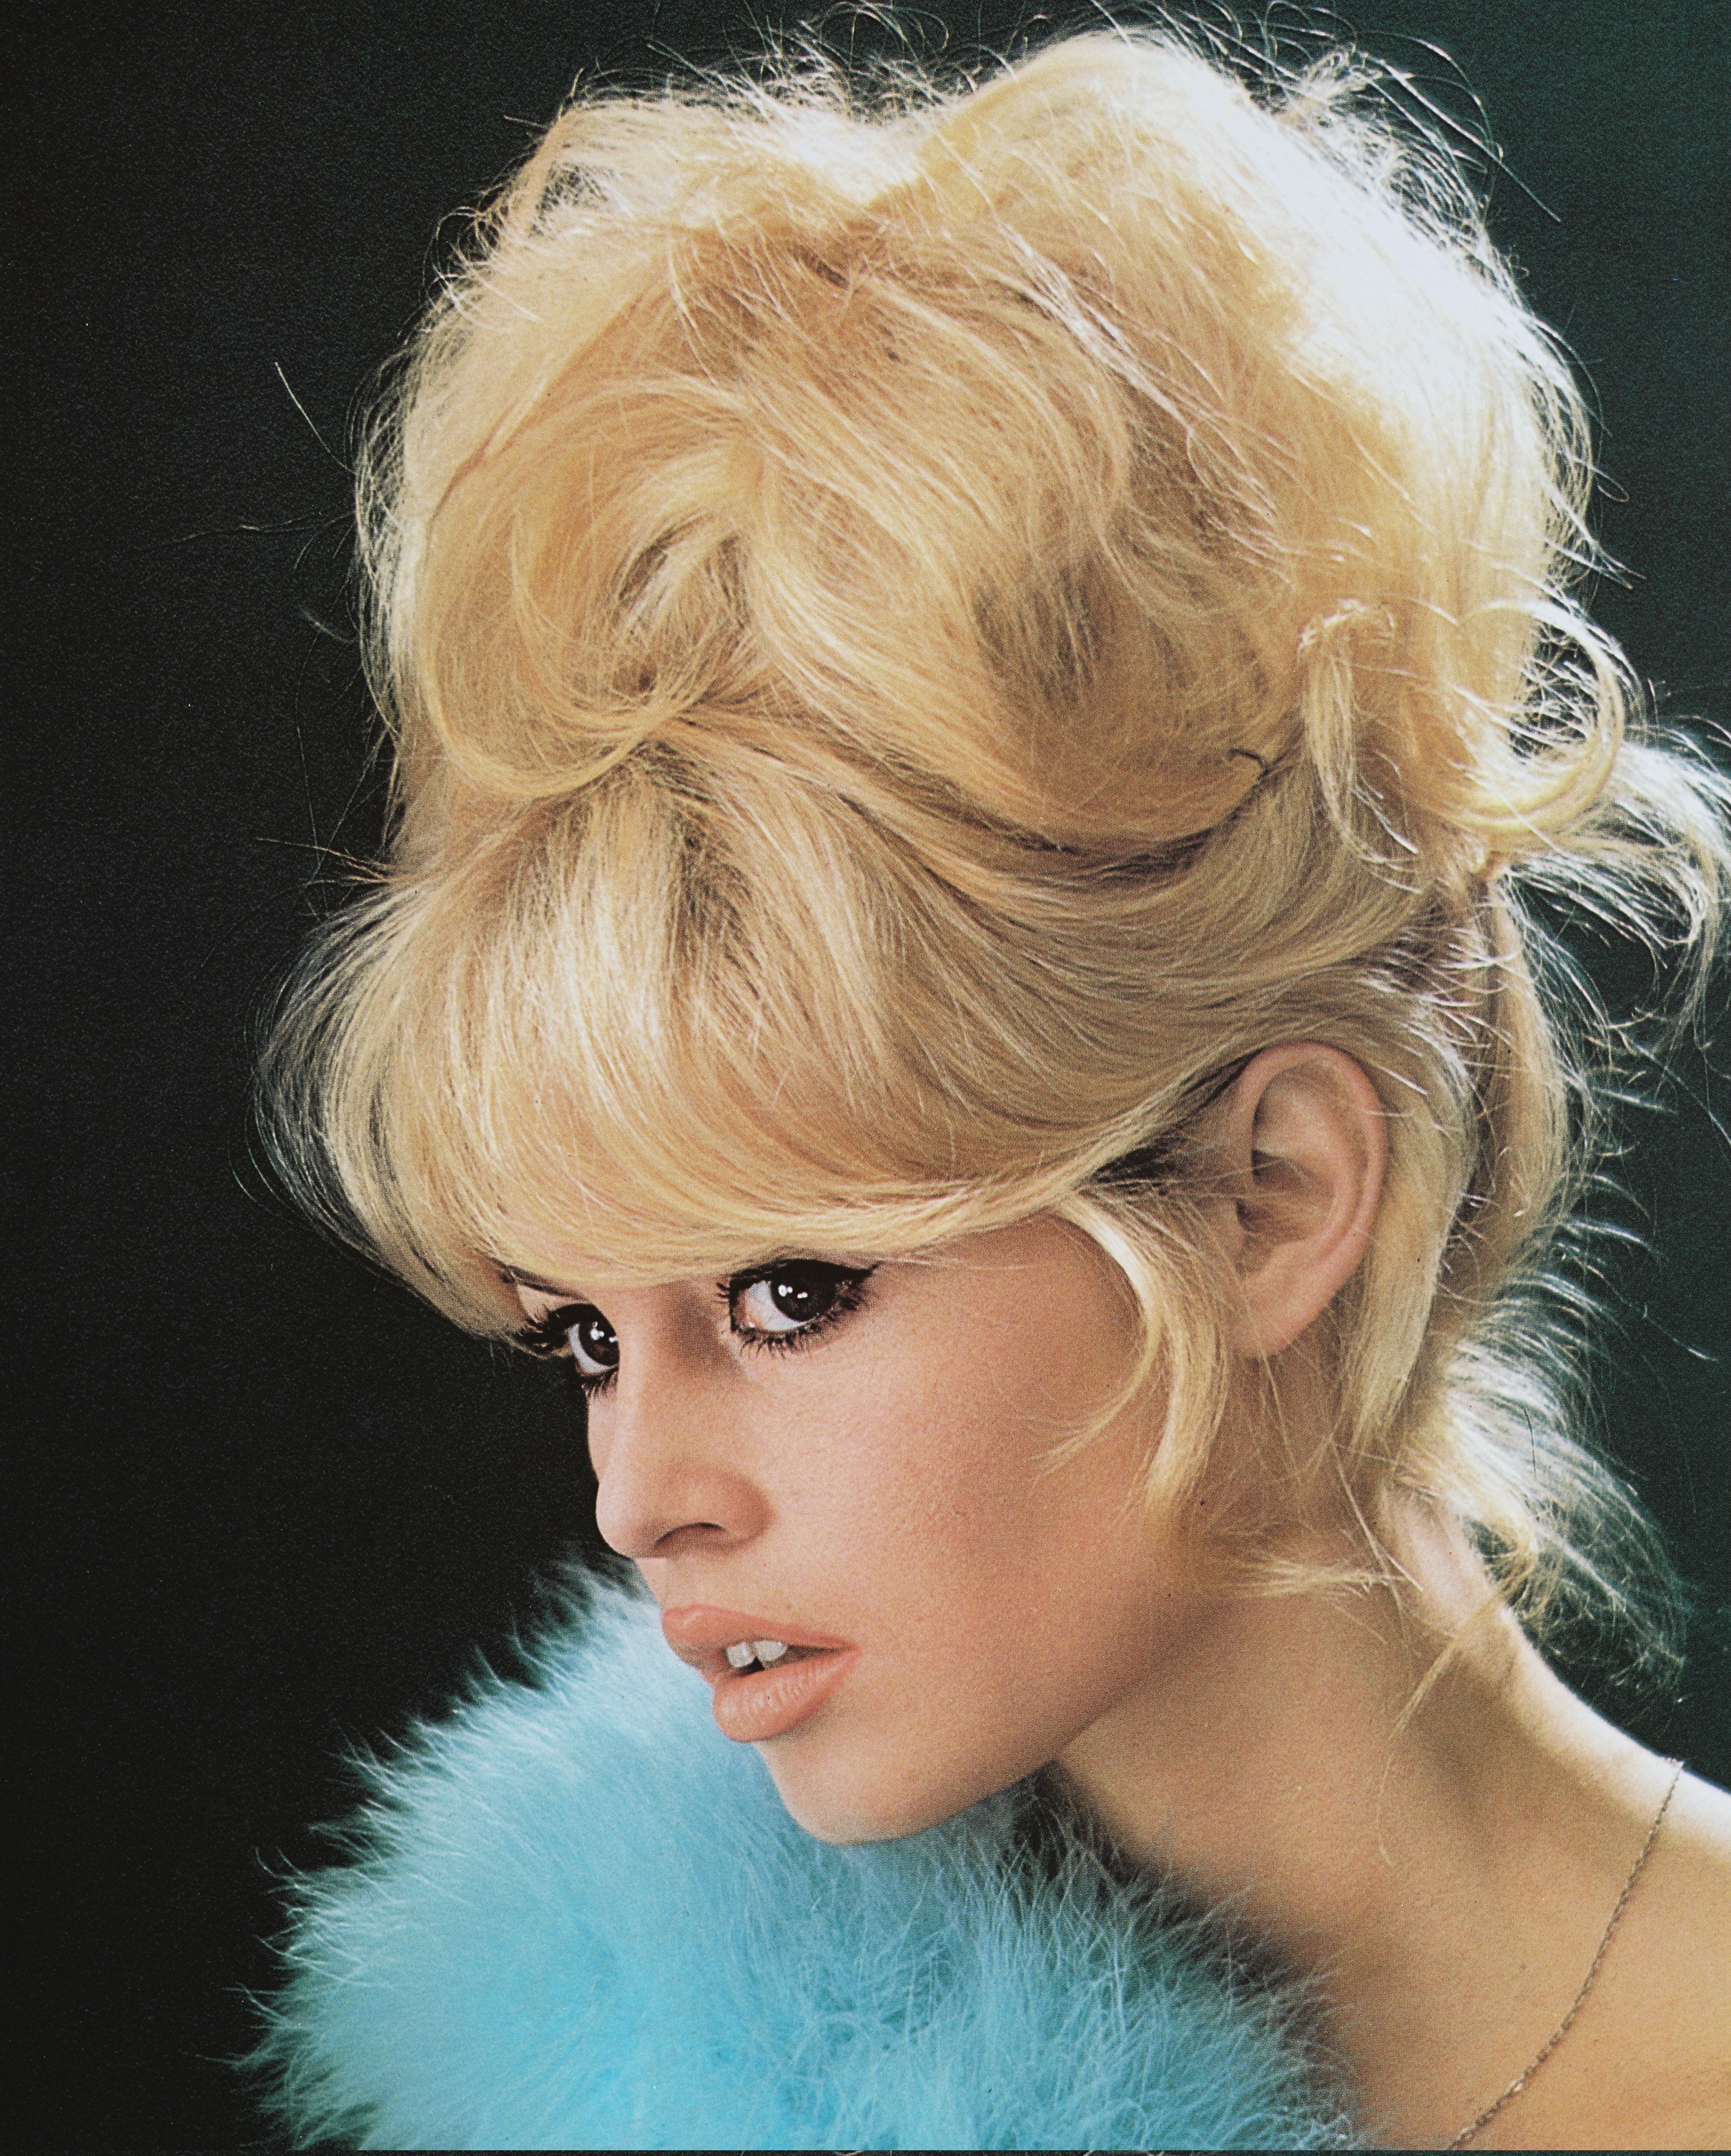 Brigitte Bardot posing for a picture in 1960. | Source: Getty Images